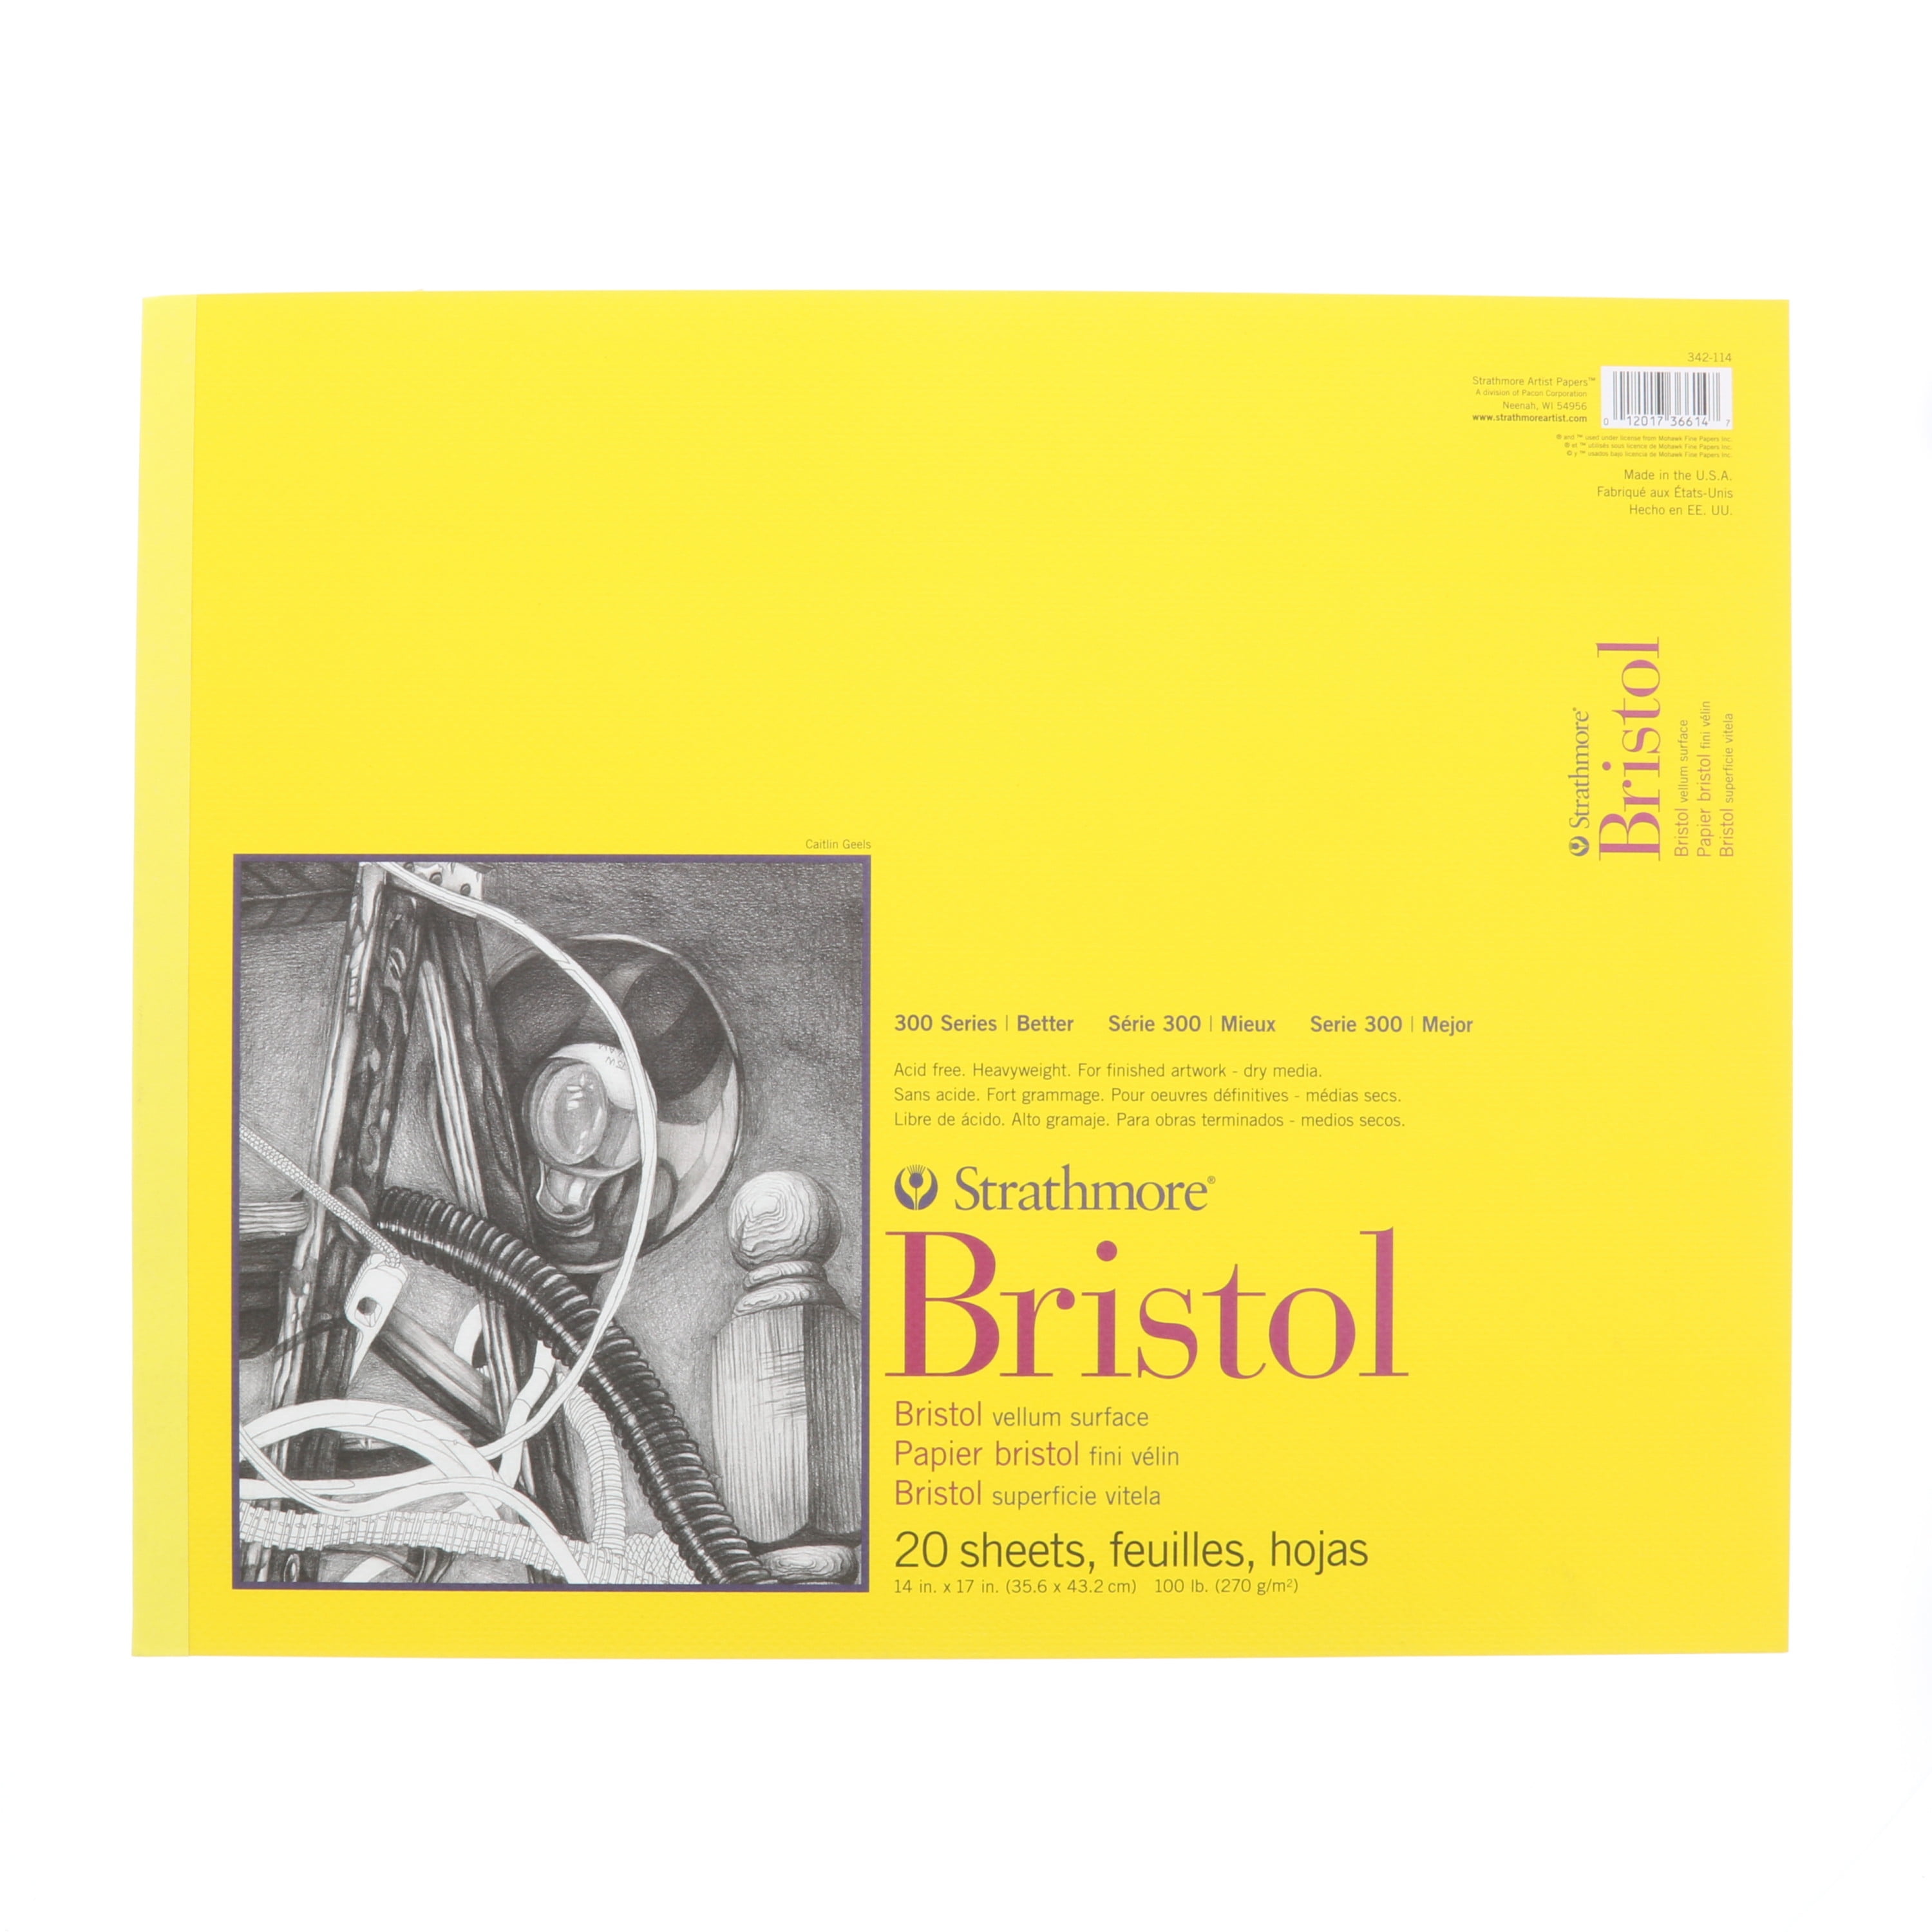 The Difference Between Bristol Smooth and Bristol Vellum